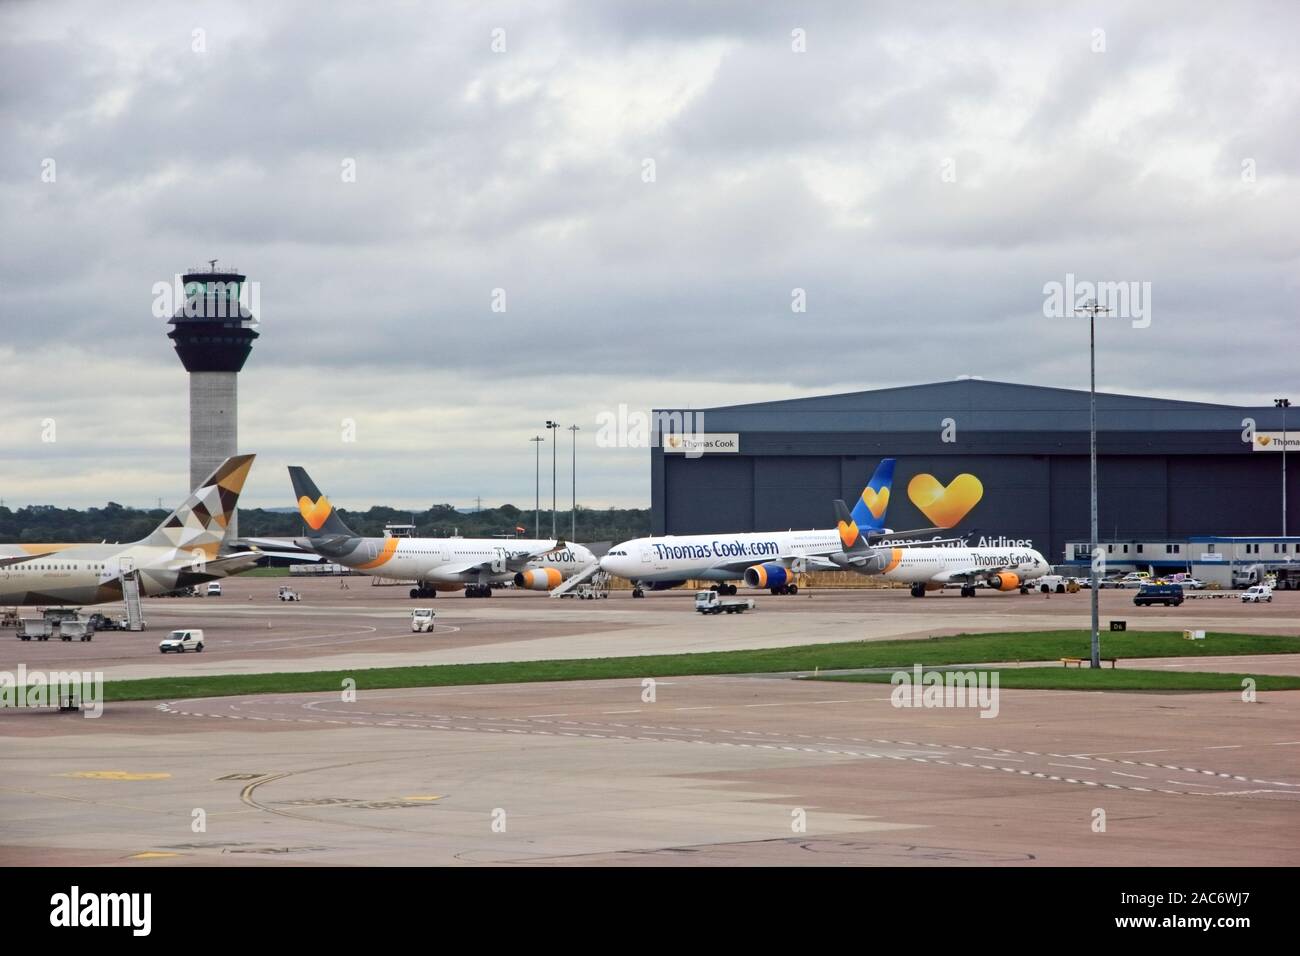 Tui airlines Boeing 767 used in repatriation of Thomas Cook passengers following collapse of Thomas Cook, Manchester Airport Stock Photo